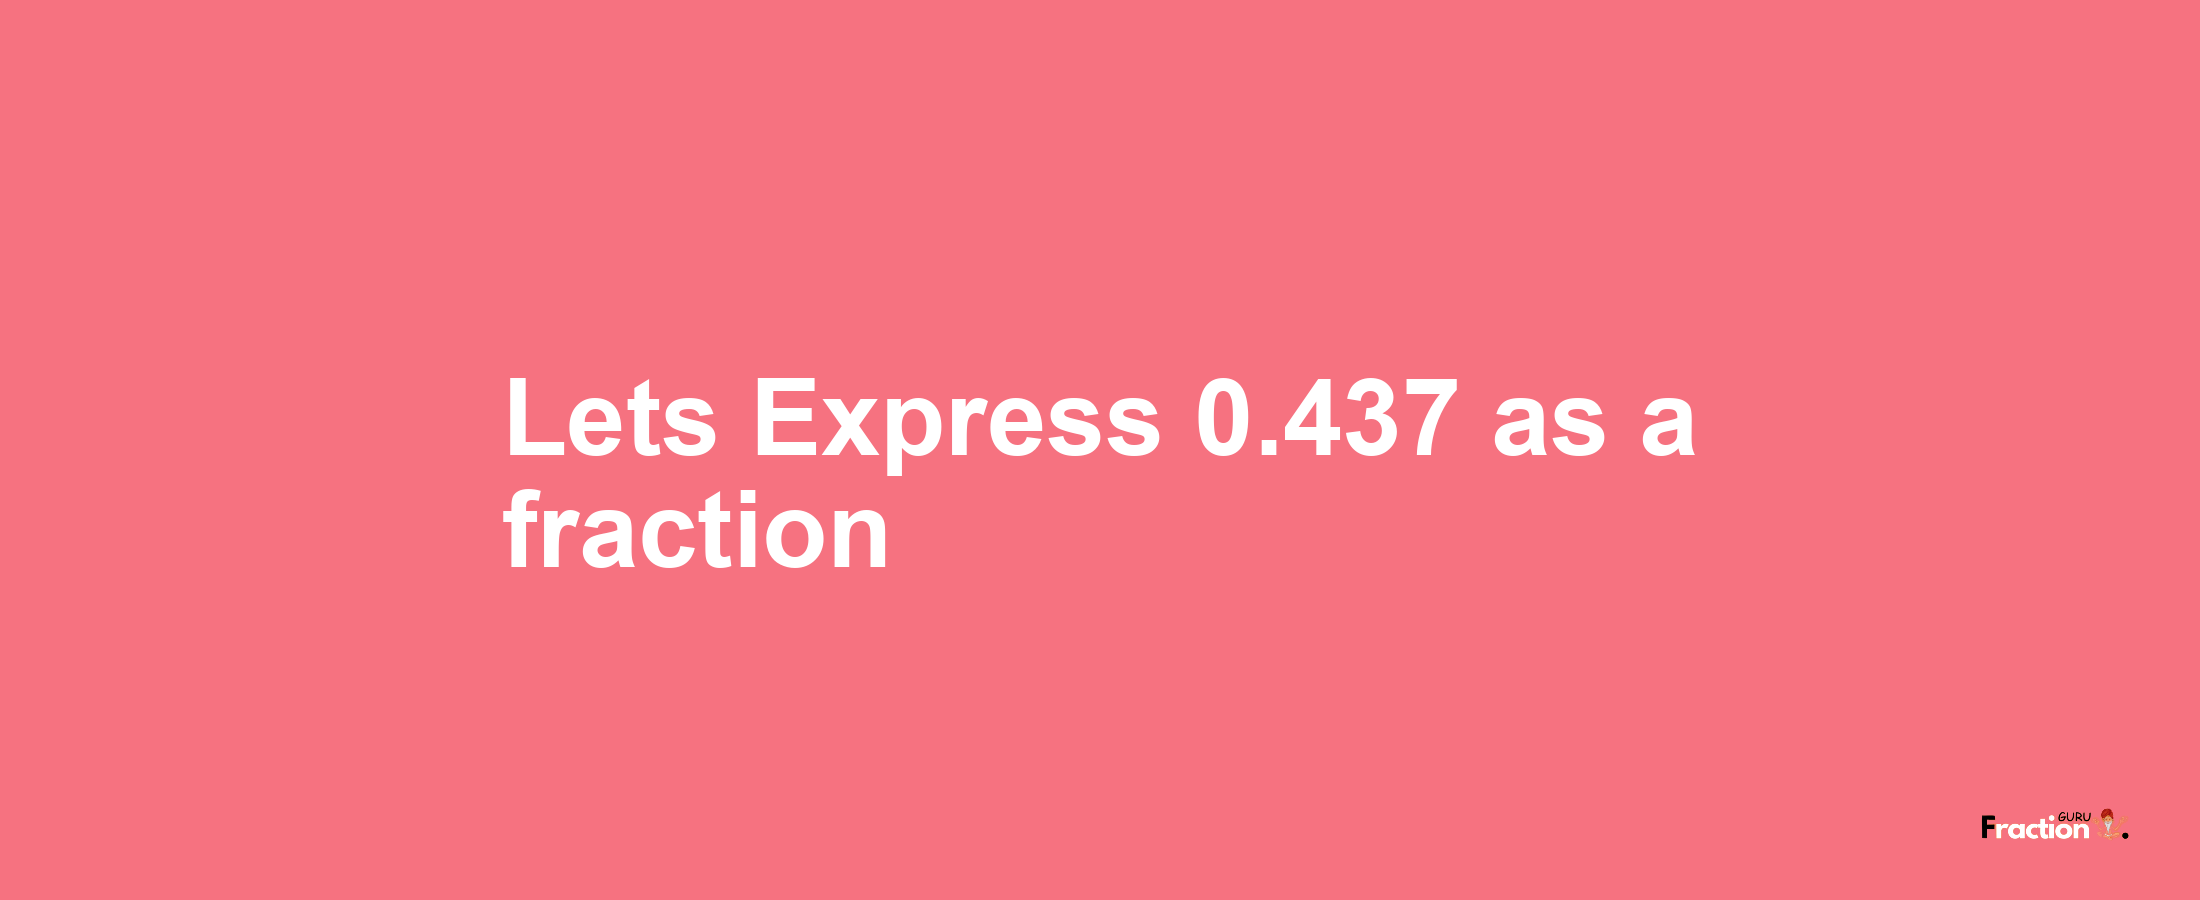 Lets Express 0.437 as afraction